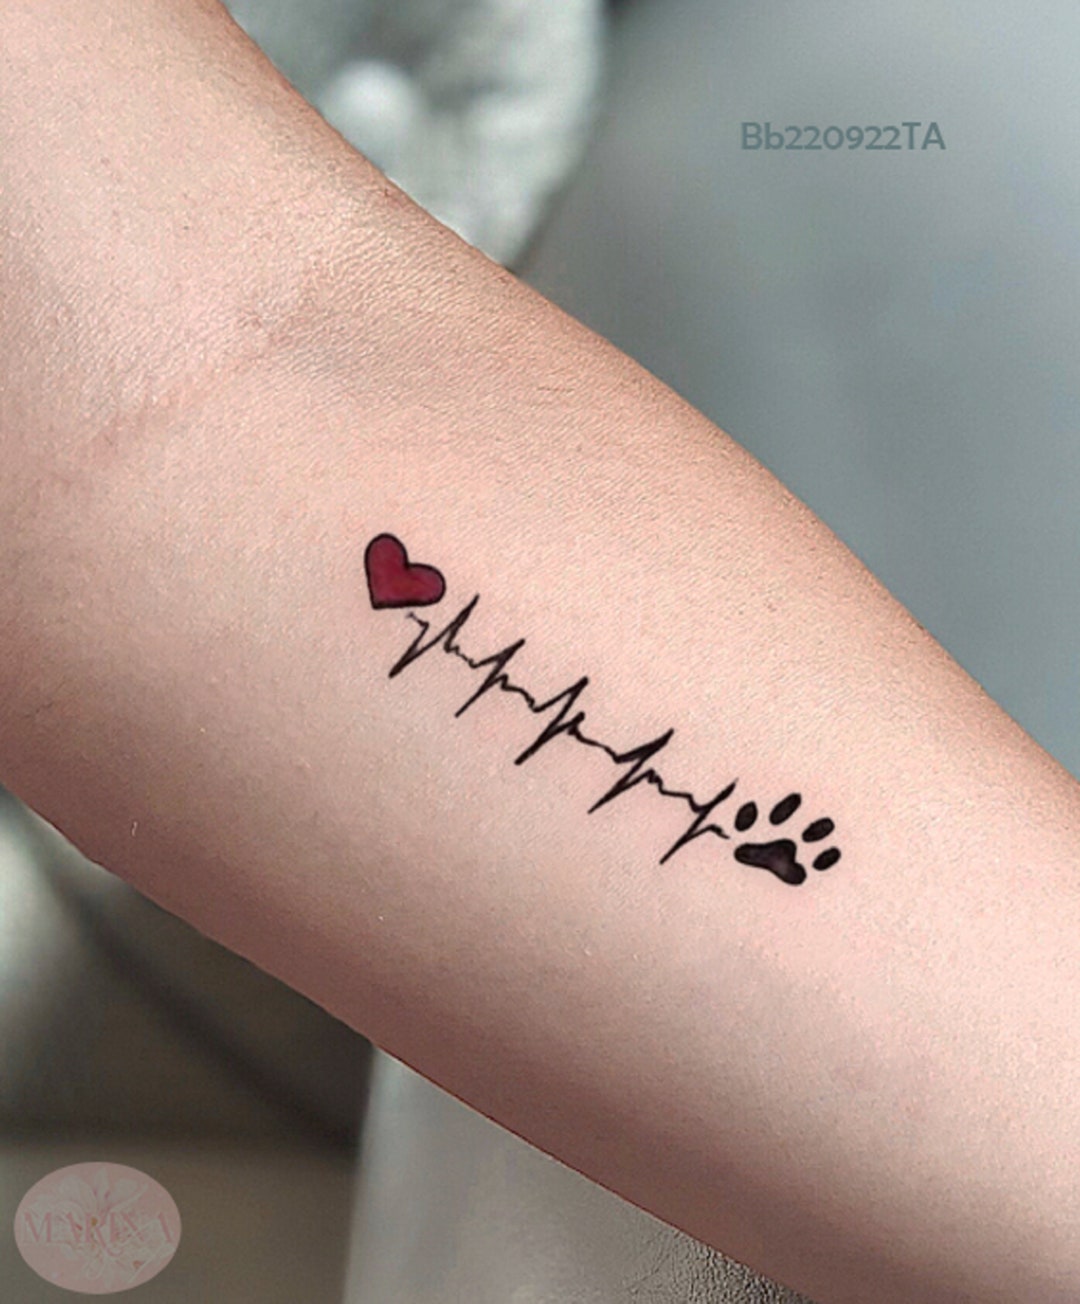 23 Heartbeat Tattoos Thatll Leave You Breathless  Heartbeat tattoo White  tattoo Tattoos